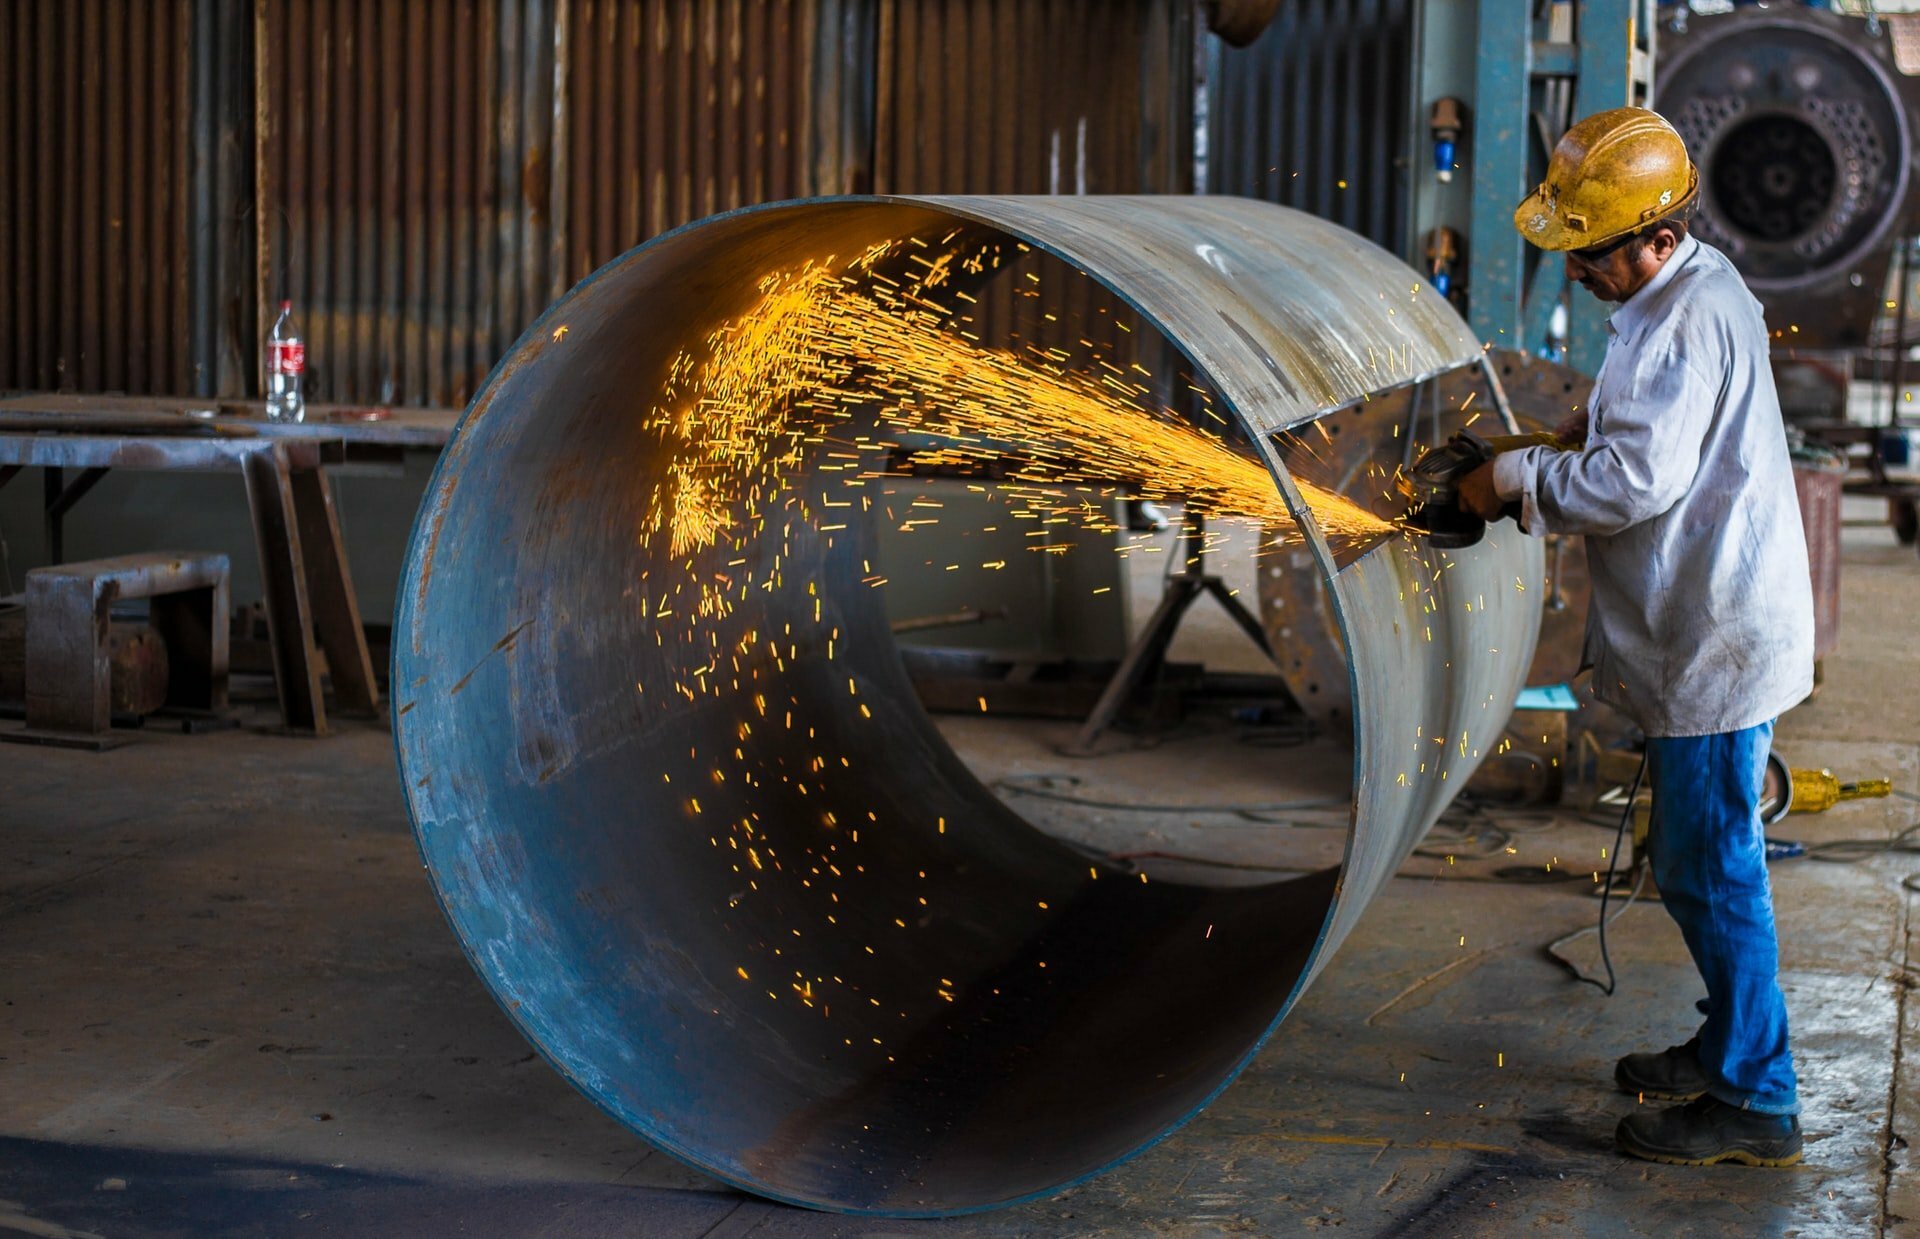 a person working on a large round object